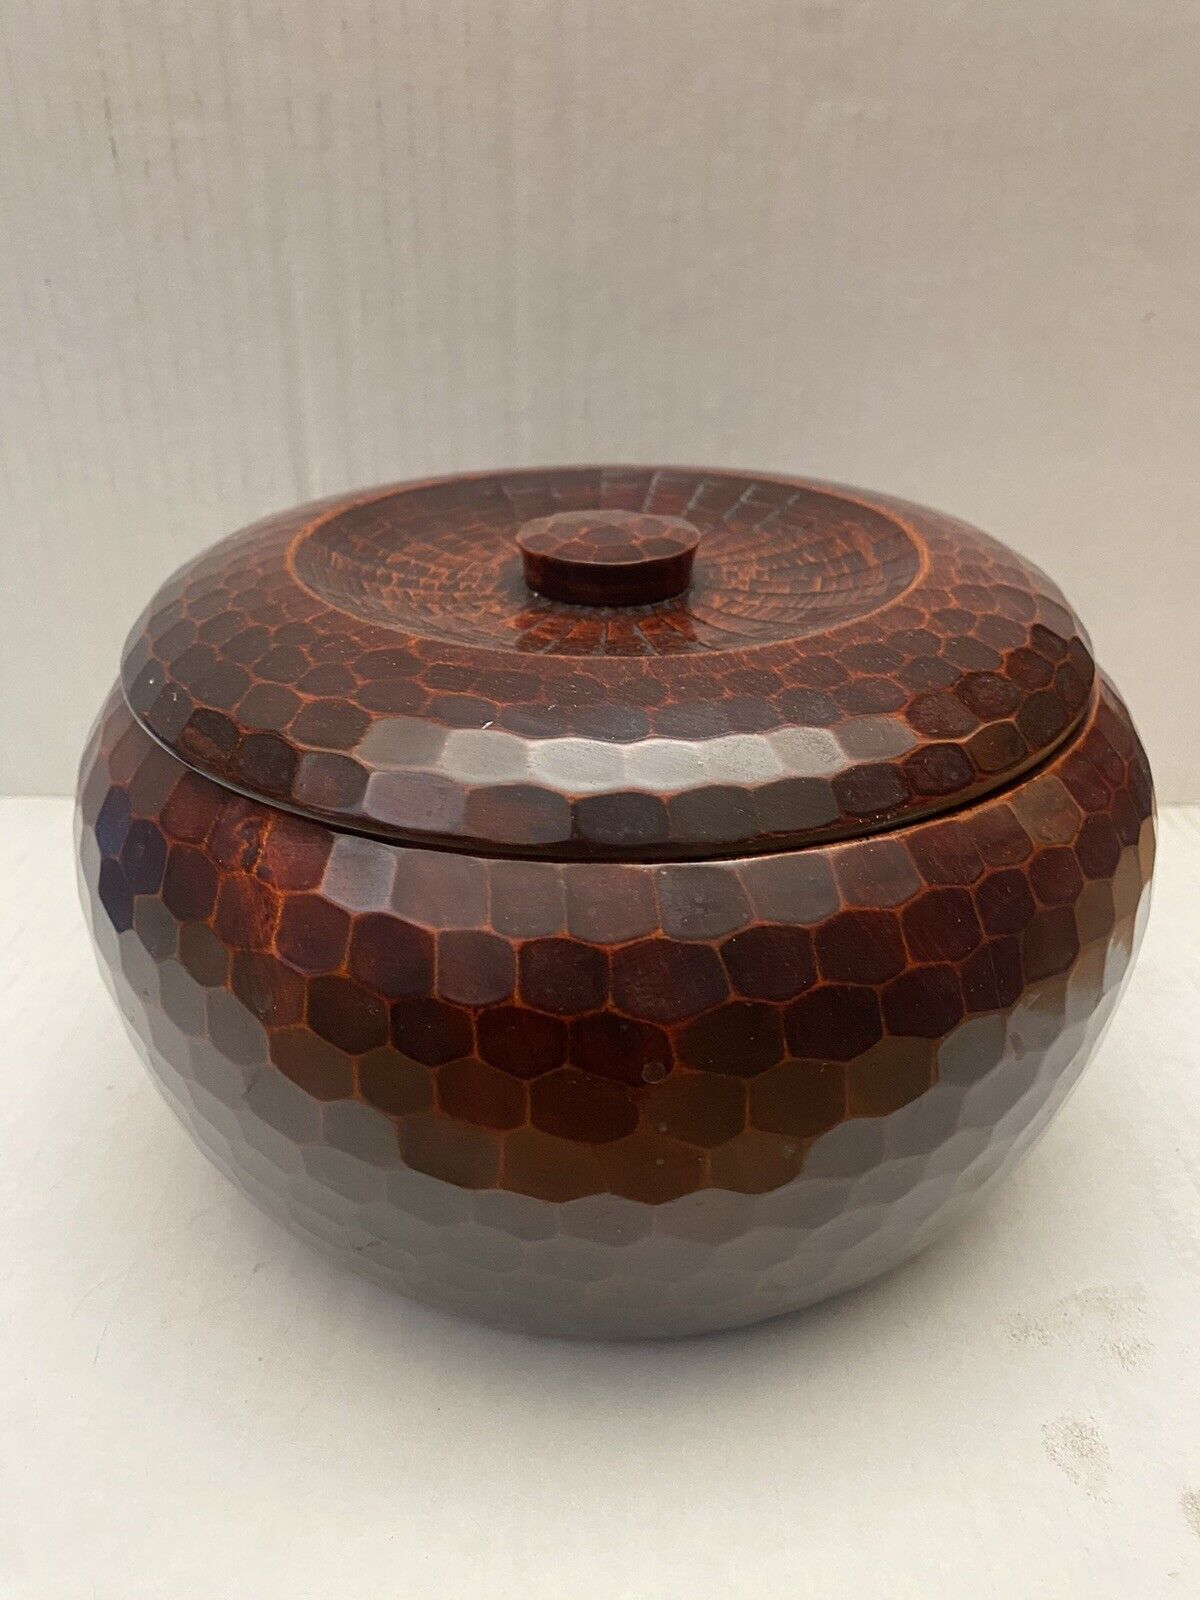 Vintage Japanese Rice Server Bowl w/ Lid, Hand Carved Wood Lacquer, Rare Ohitsu